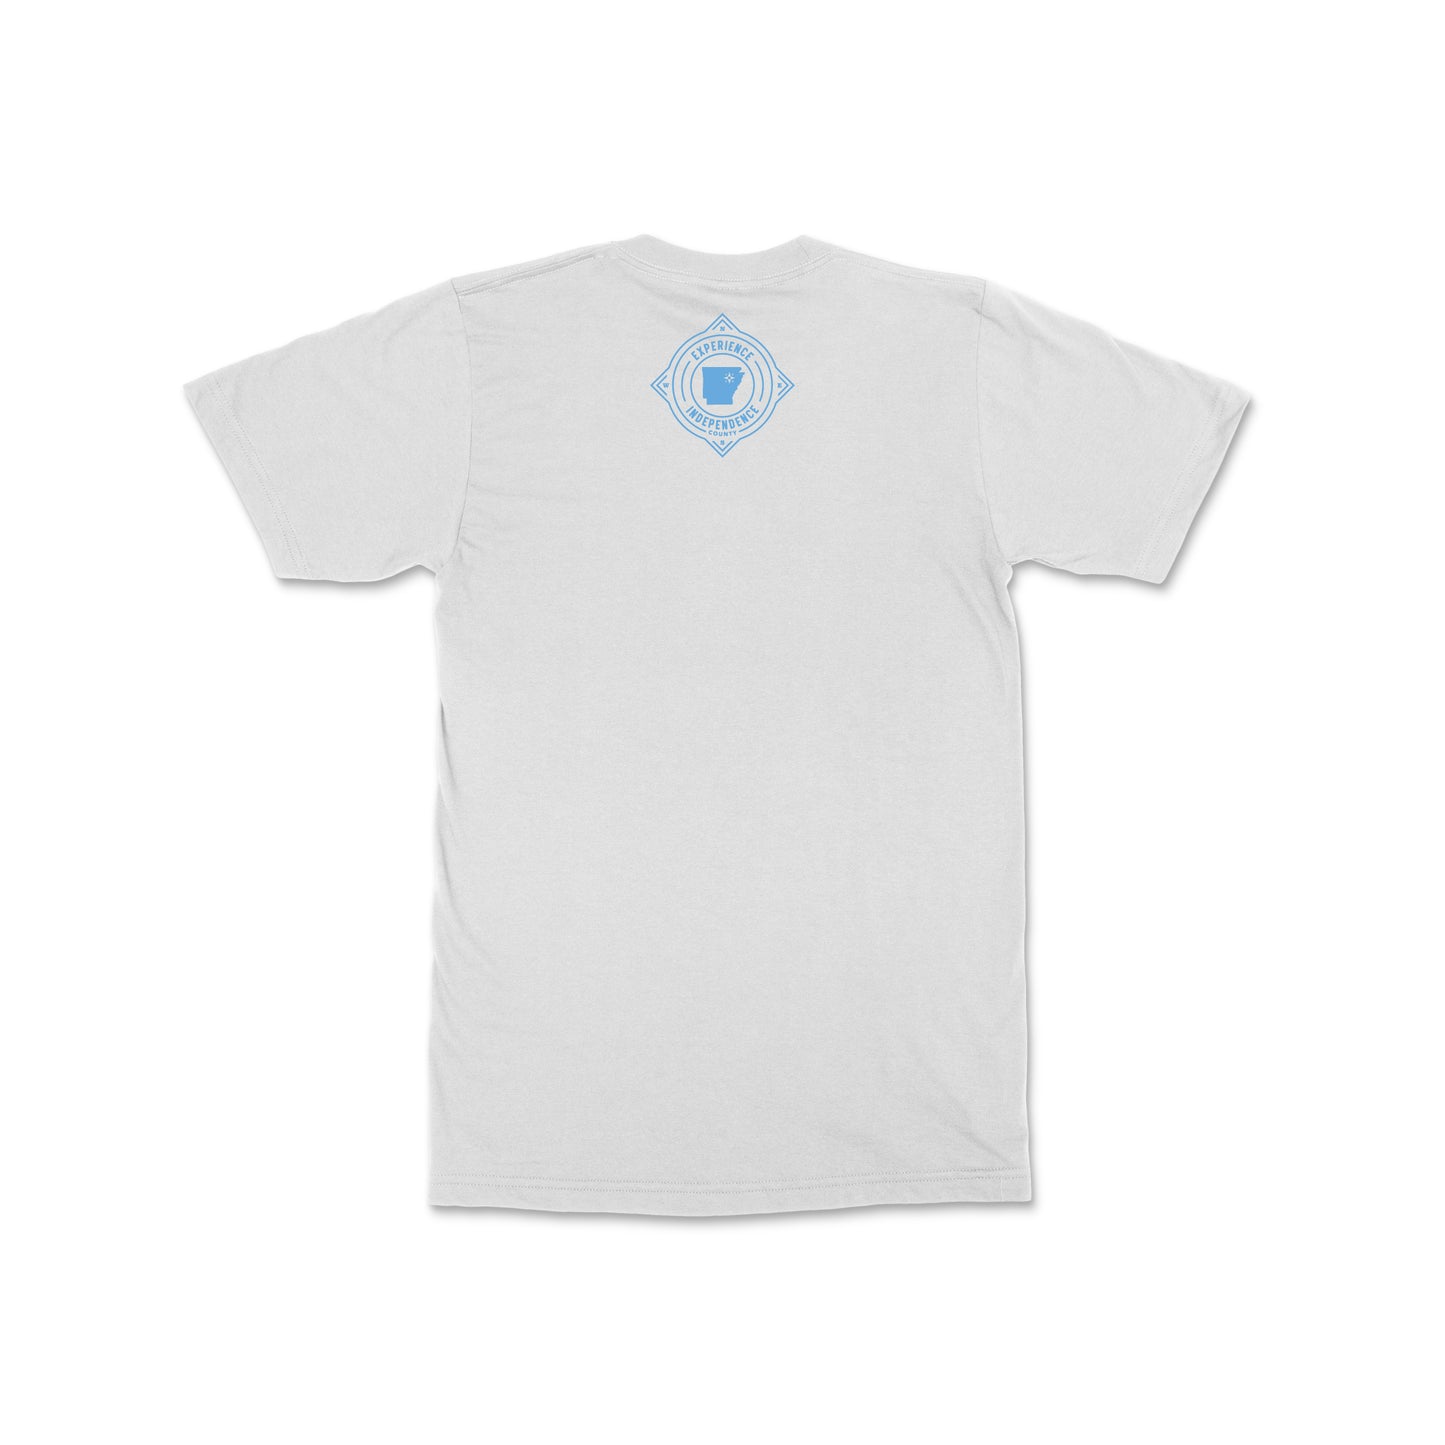 EXP IND Tee - White